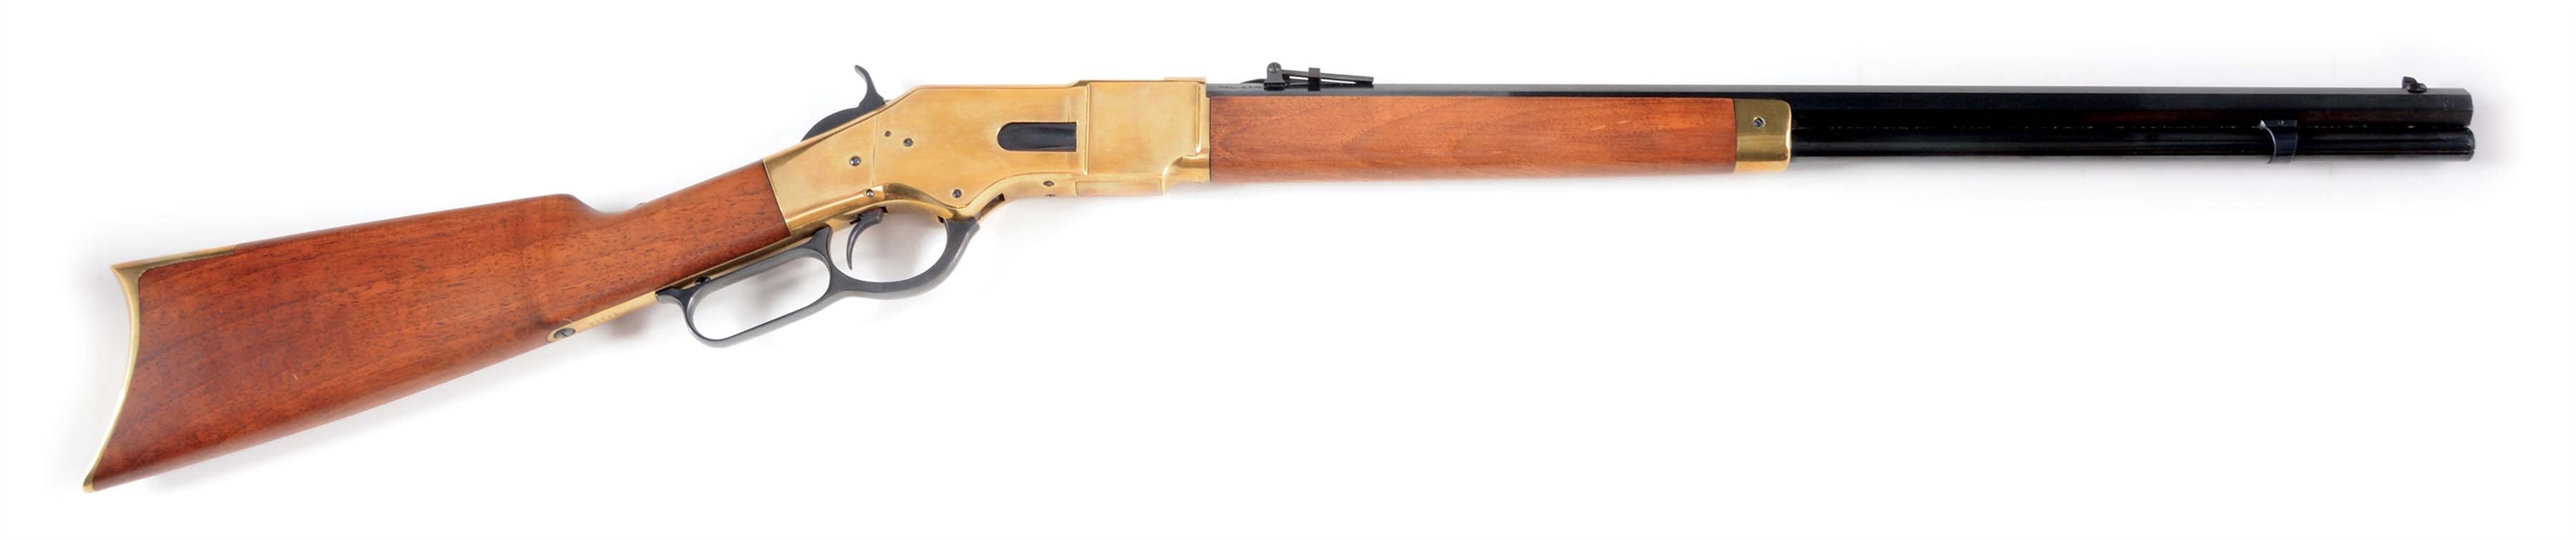 (M) NAVY ARMS 1866 "YELLOW BOY" LEVER ACTION RIFLE.